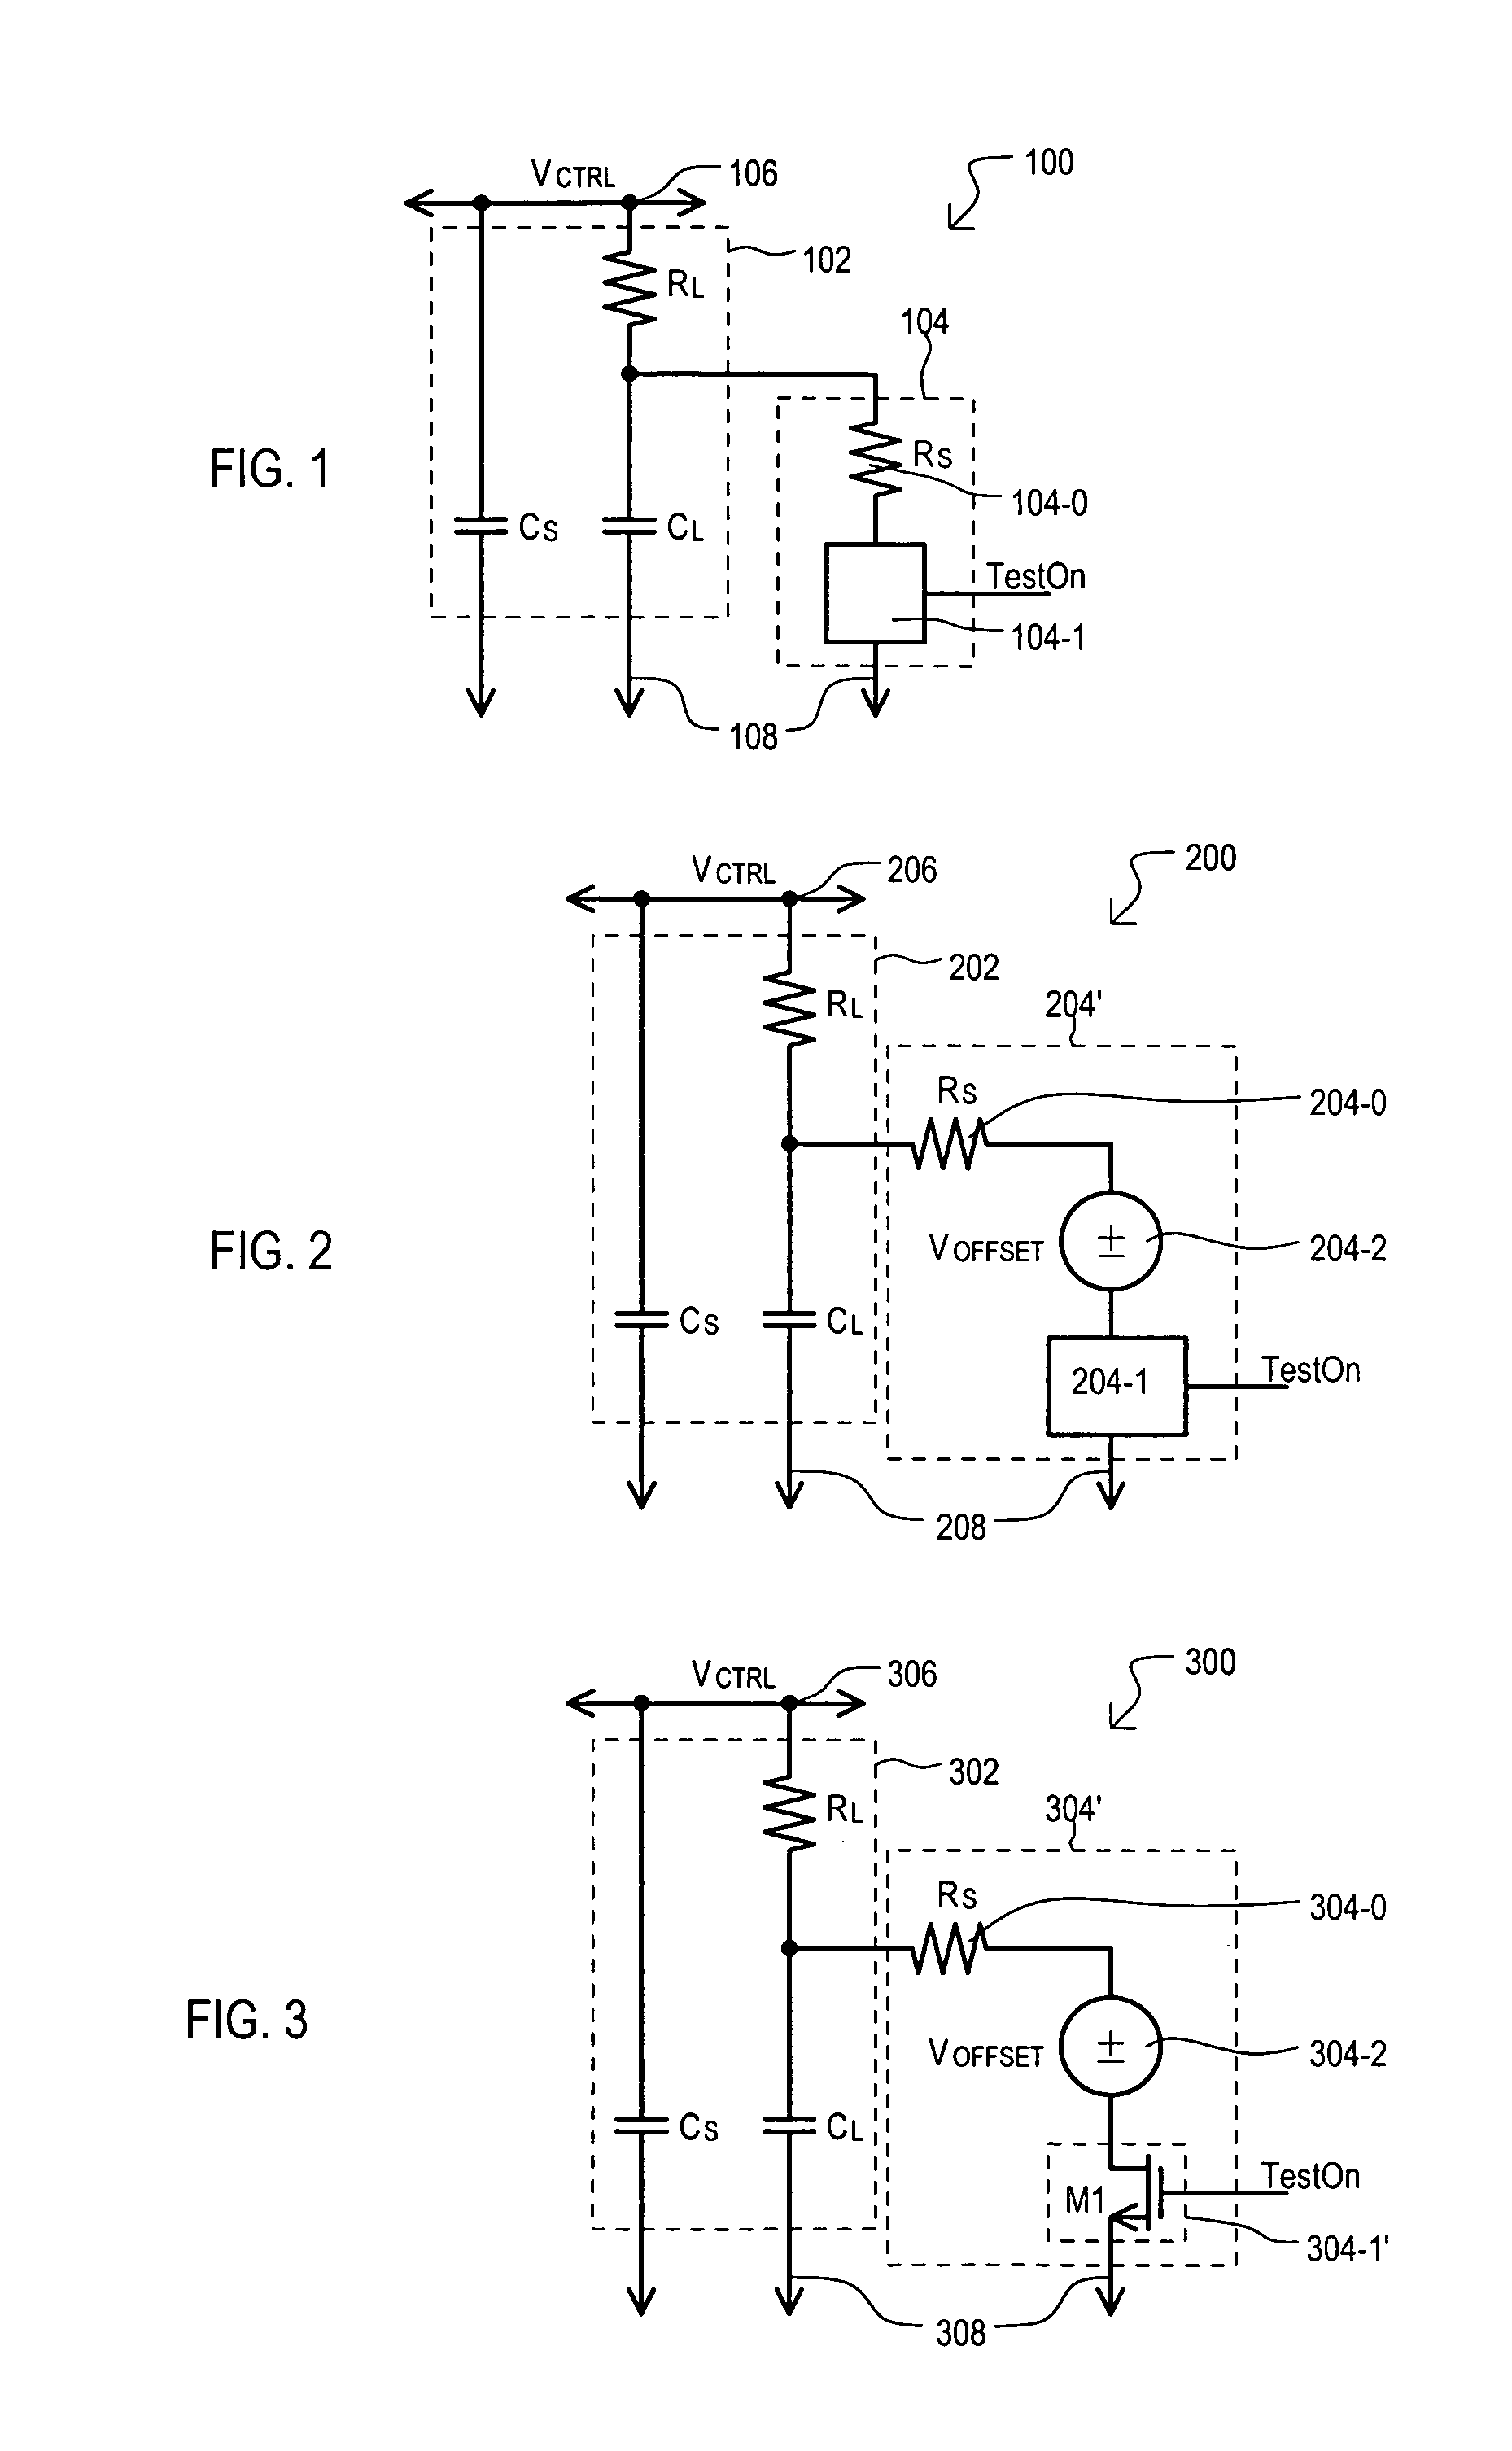 Open loop bandwidth test architecture and method for phase locked loop (PLL)